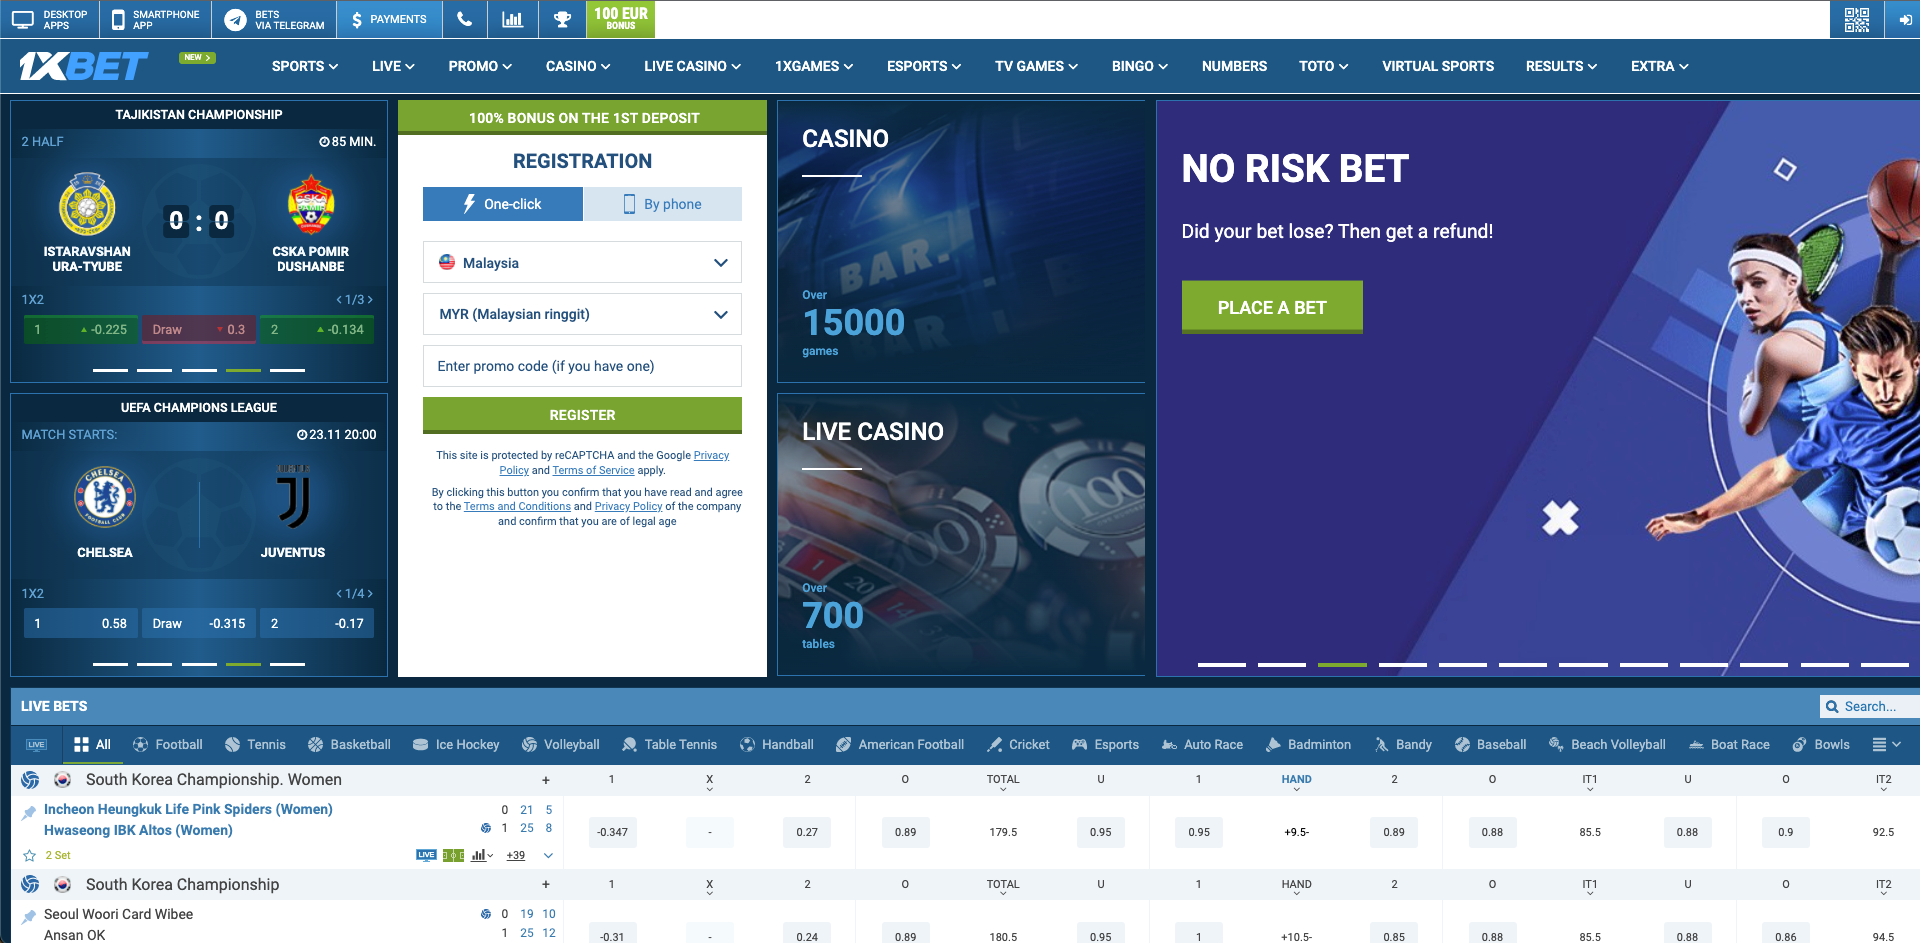 1xbet sportsbook Malaysia - registration page screen